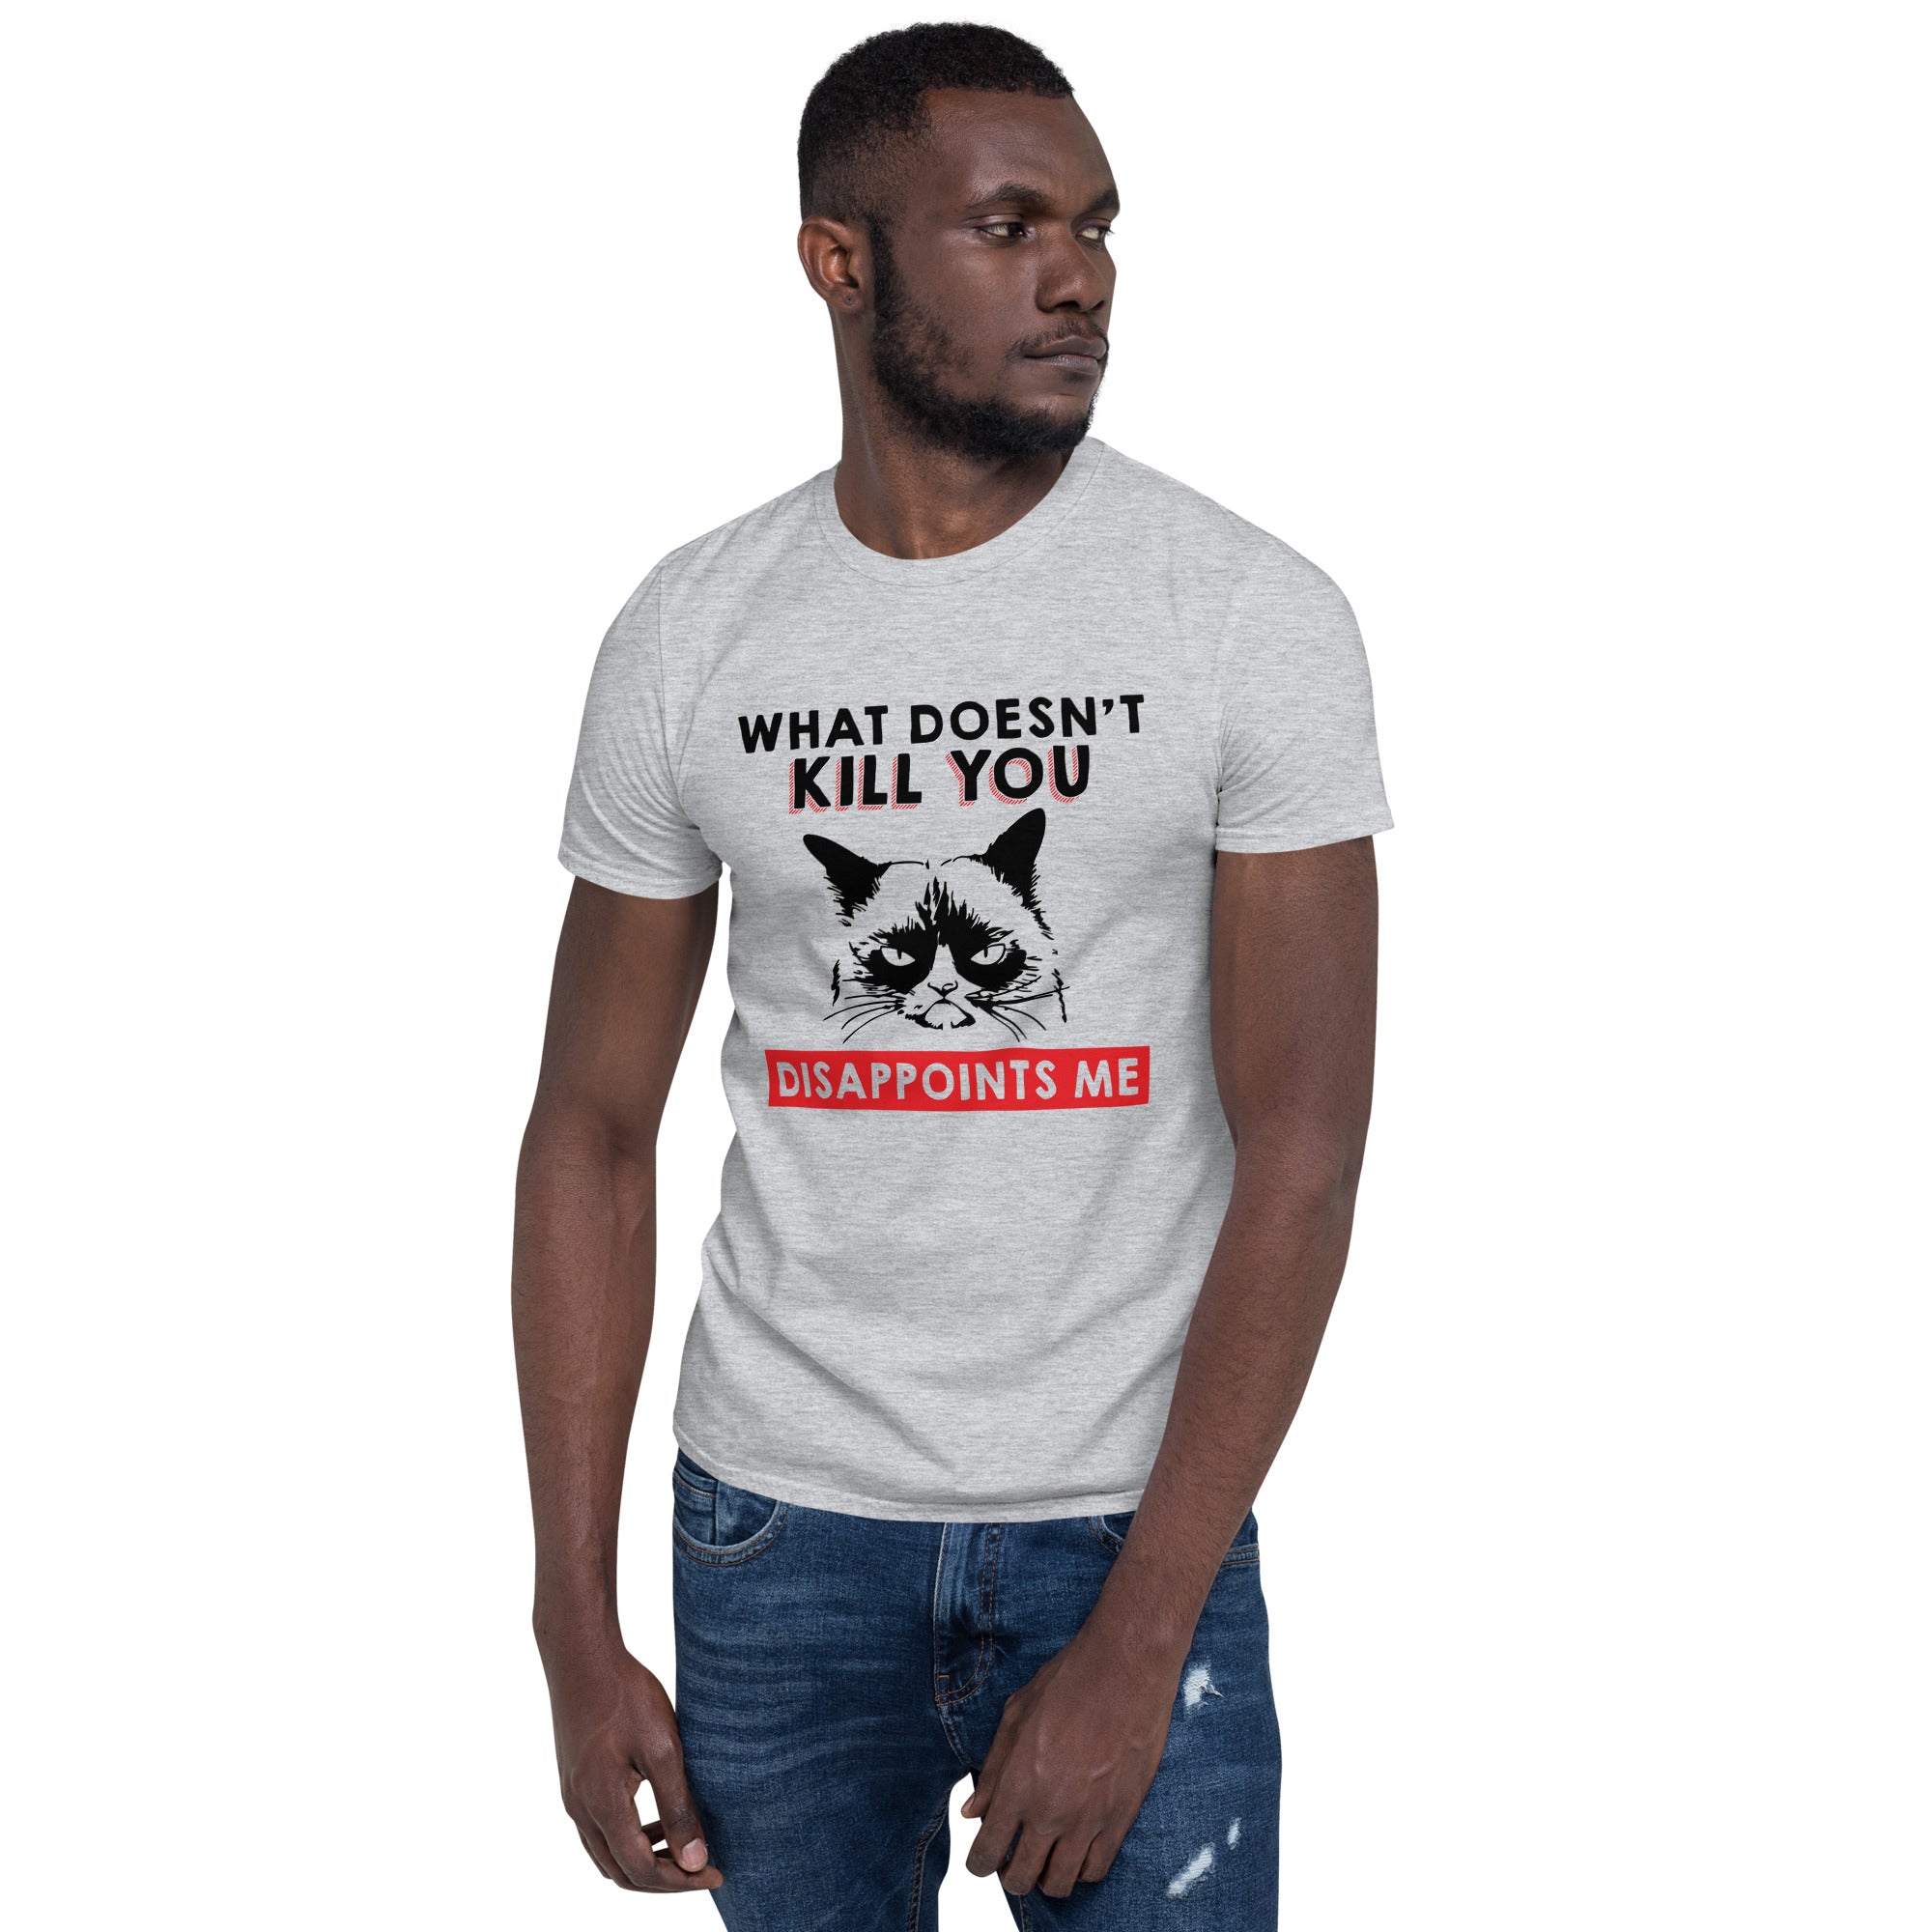 What Doesn't Kill You - Short-Sleeve Unisex T-Shirt